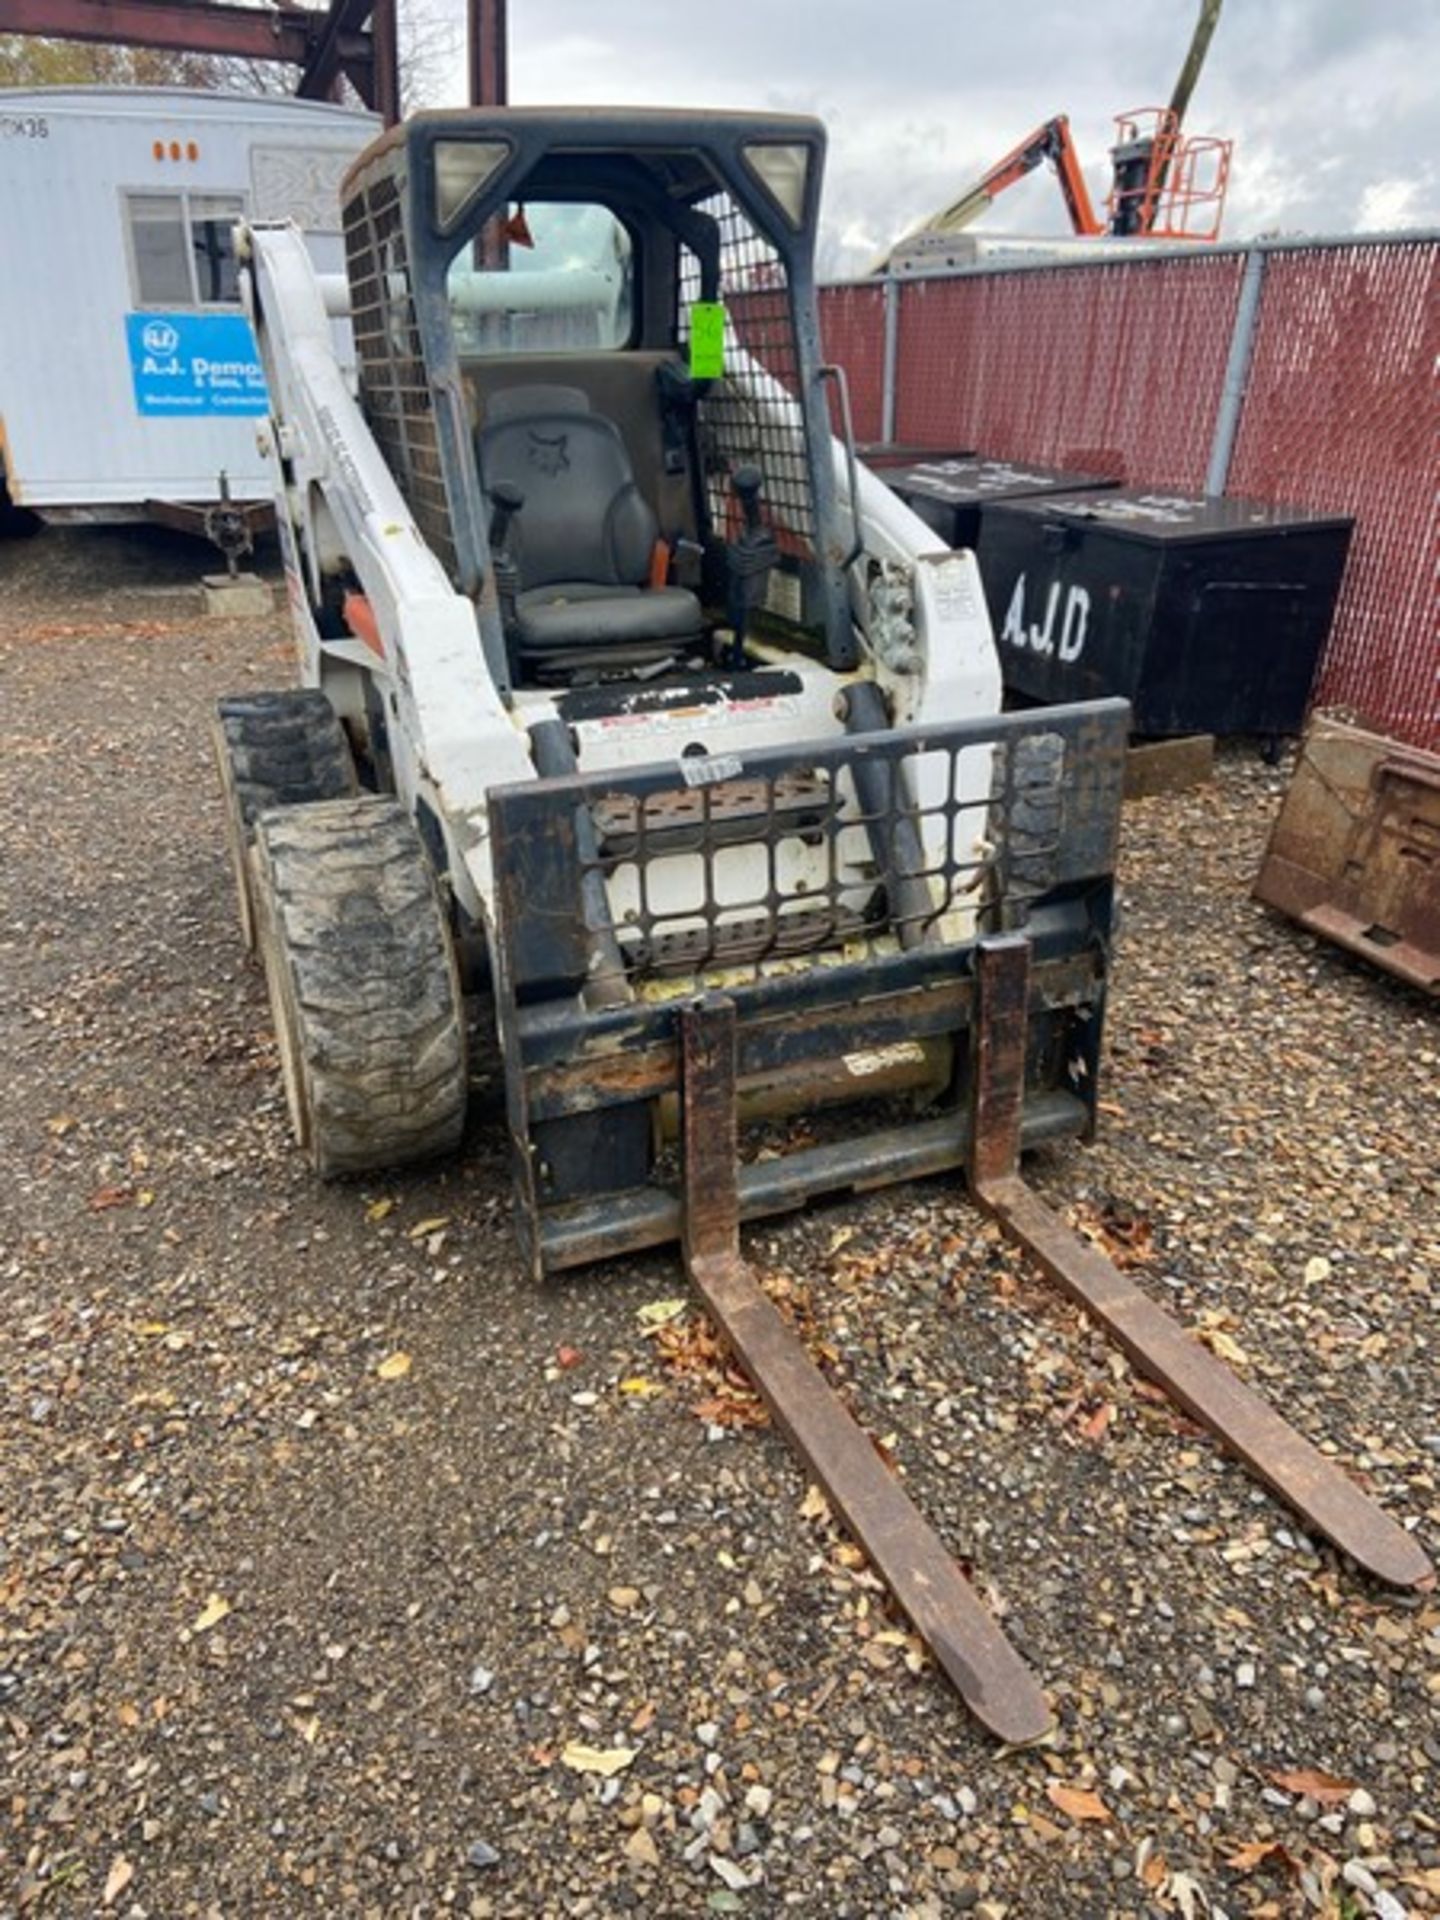 2010 Bobcat S250 Compact Skid Steer, VIN#: A5GM36985, with Fork Attachment (NOTE: DELAYED REMOVAL - Image 2 of 12